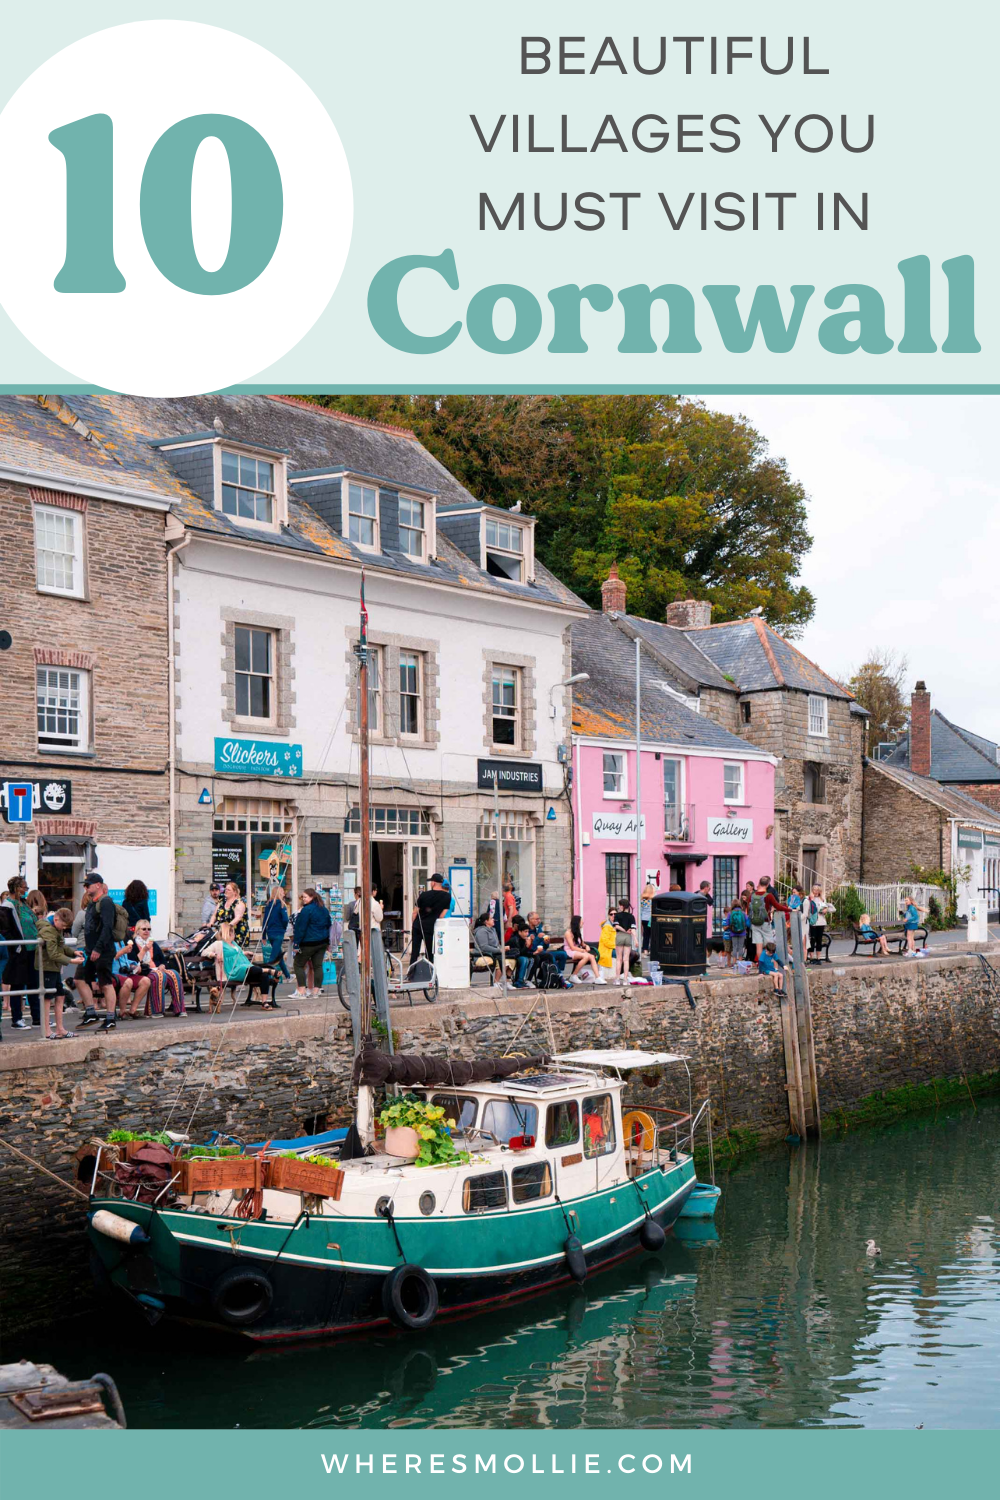 10 beautiful villages you must visit in Cornwall